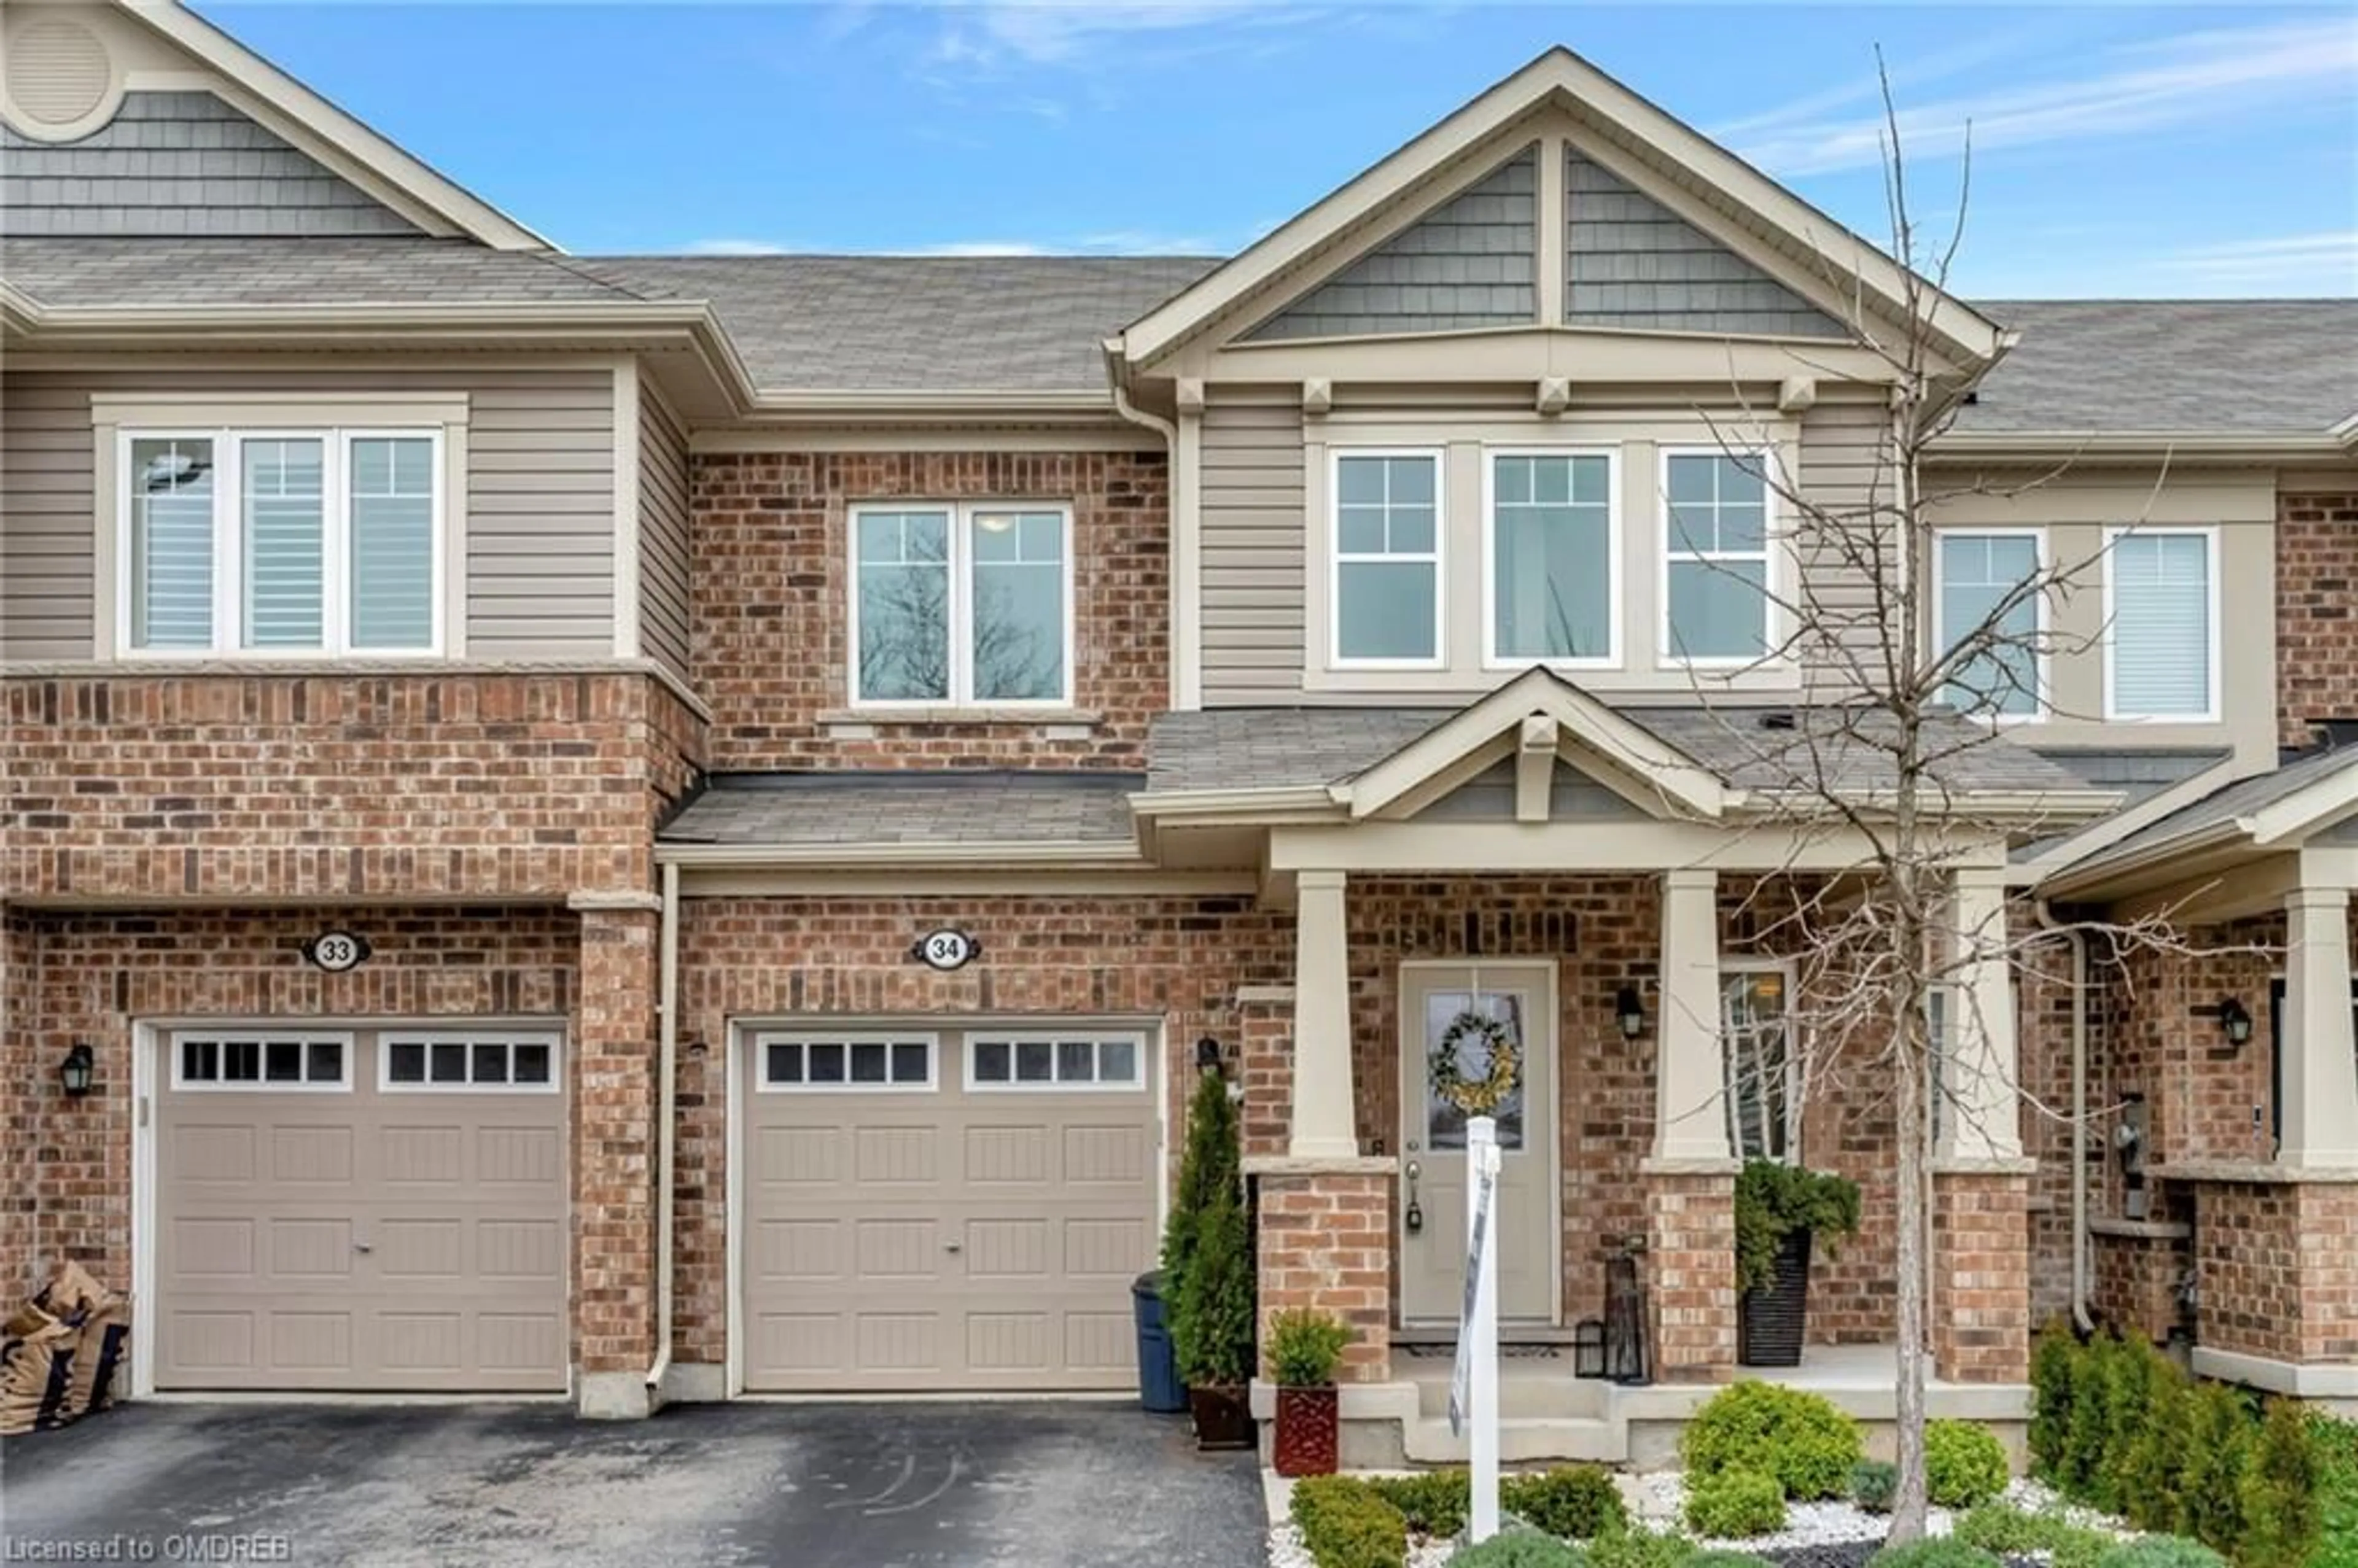 Home with brick exterior material for 22 Spring Creek Dr #34, Waterdown Ontario 18B 1V7